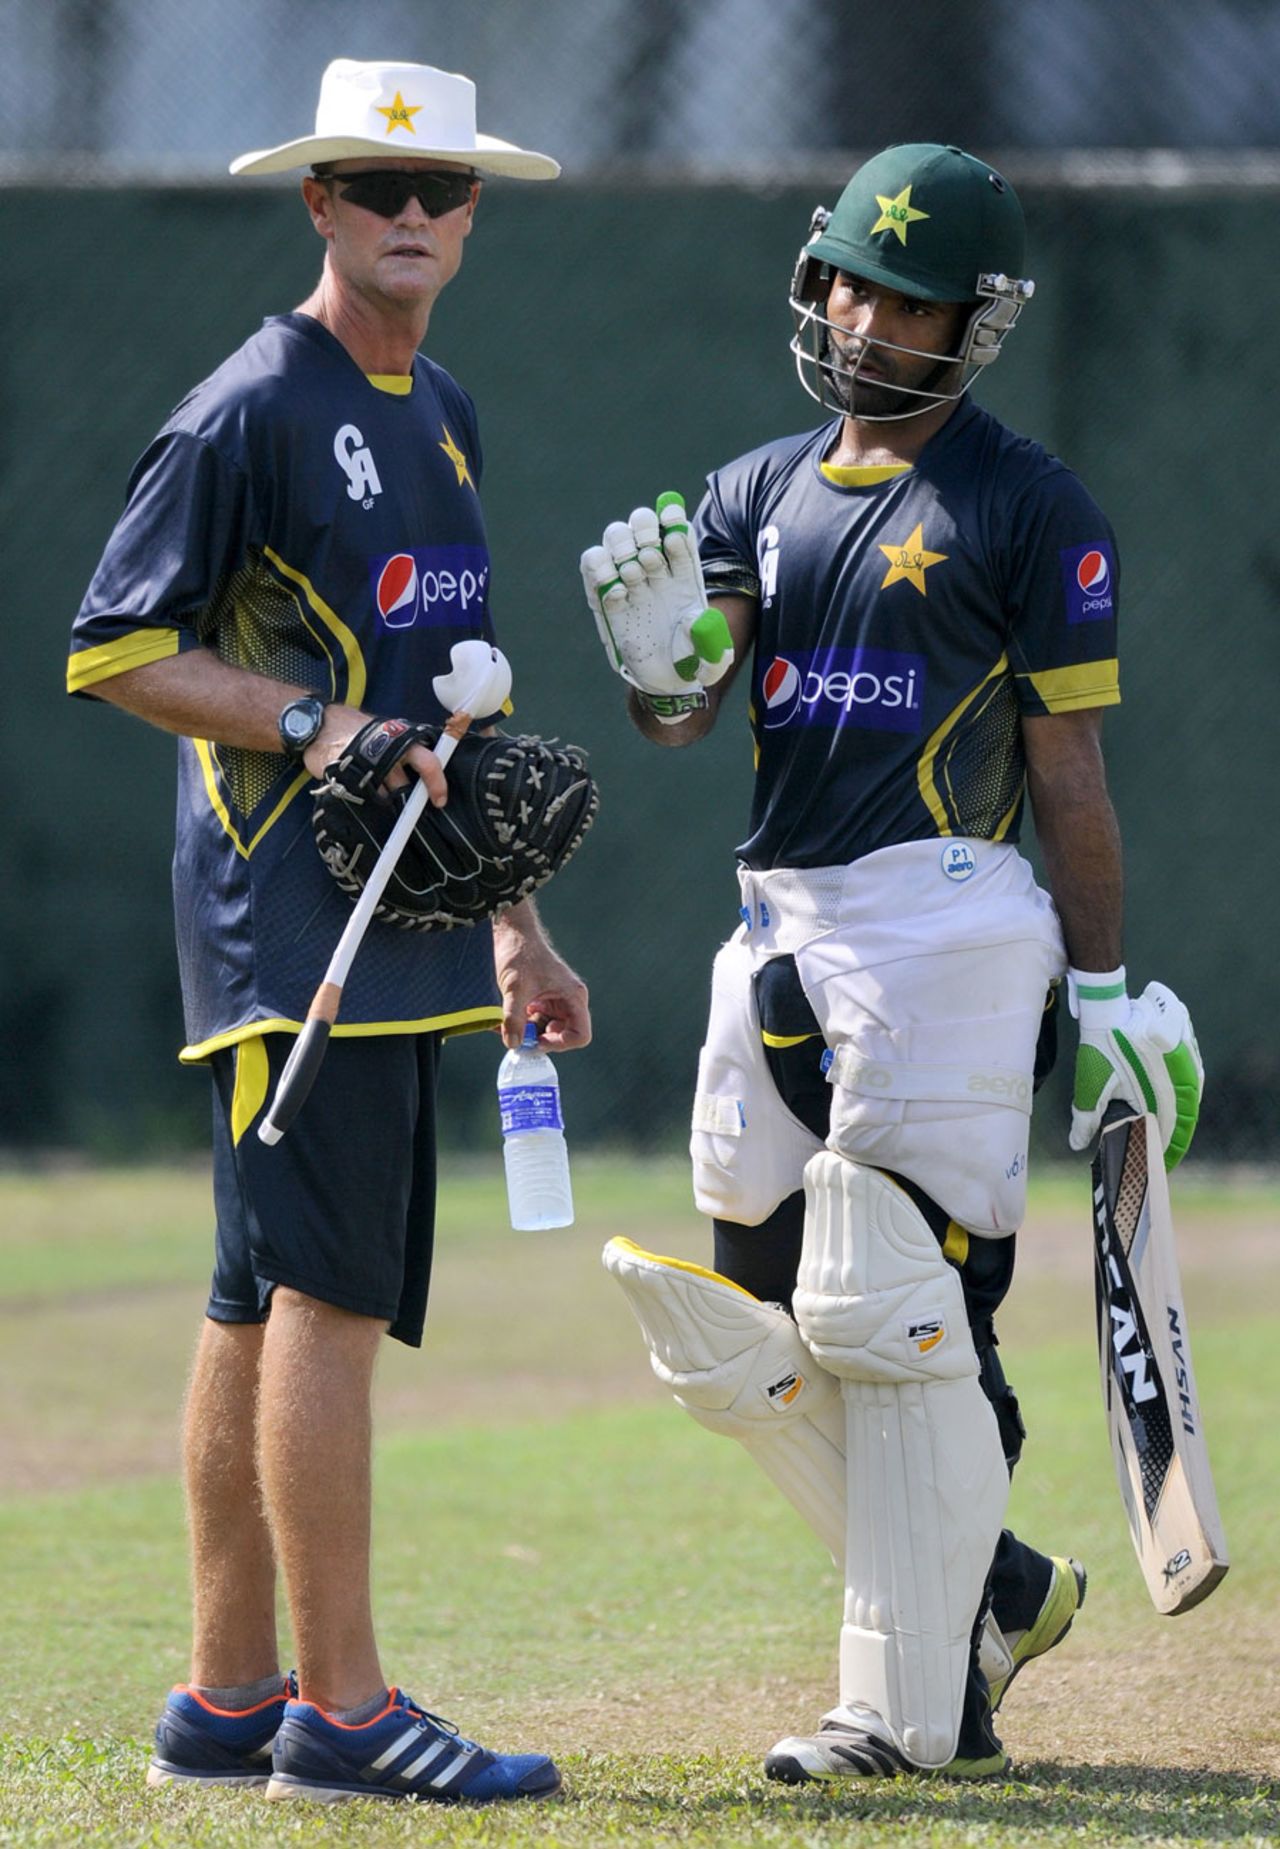 Asad Shafiq has a chat with Grant Flower, Colombo, August 13, 2014